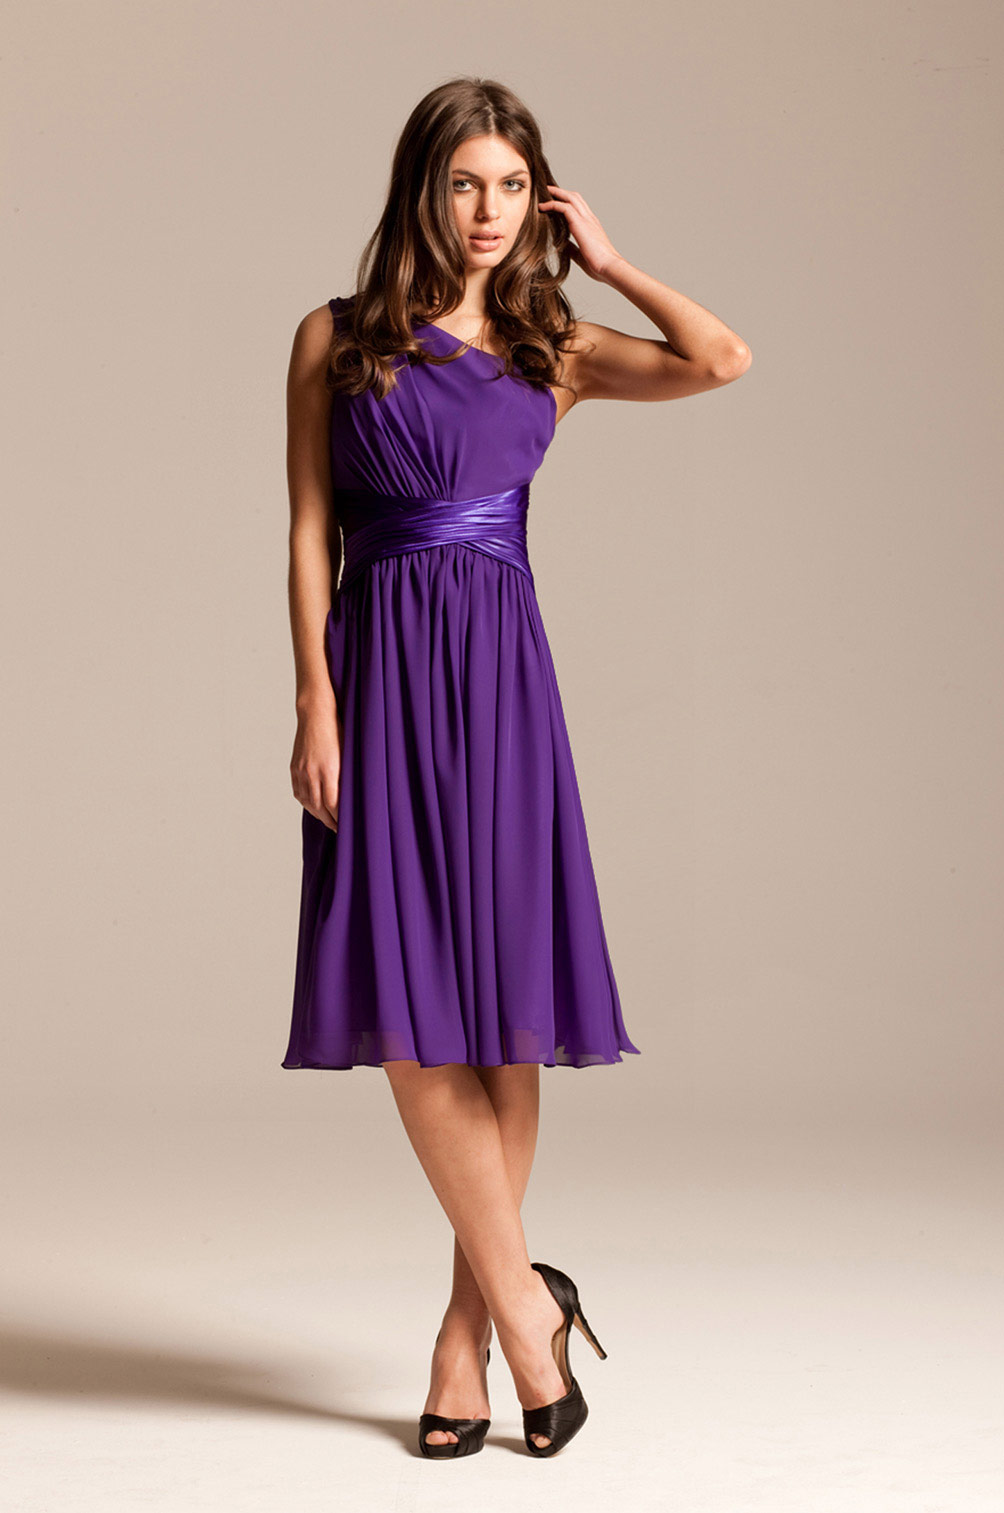 Purple Cocktail Dress Picture Collection Dressed Up Girl